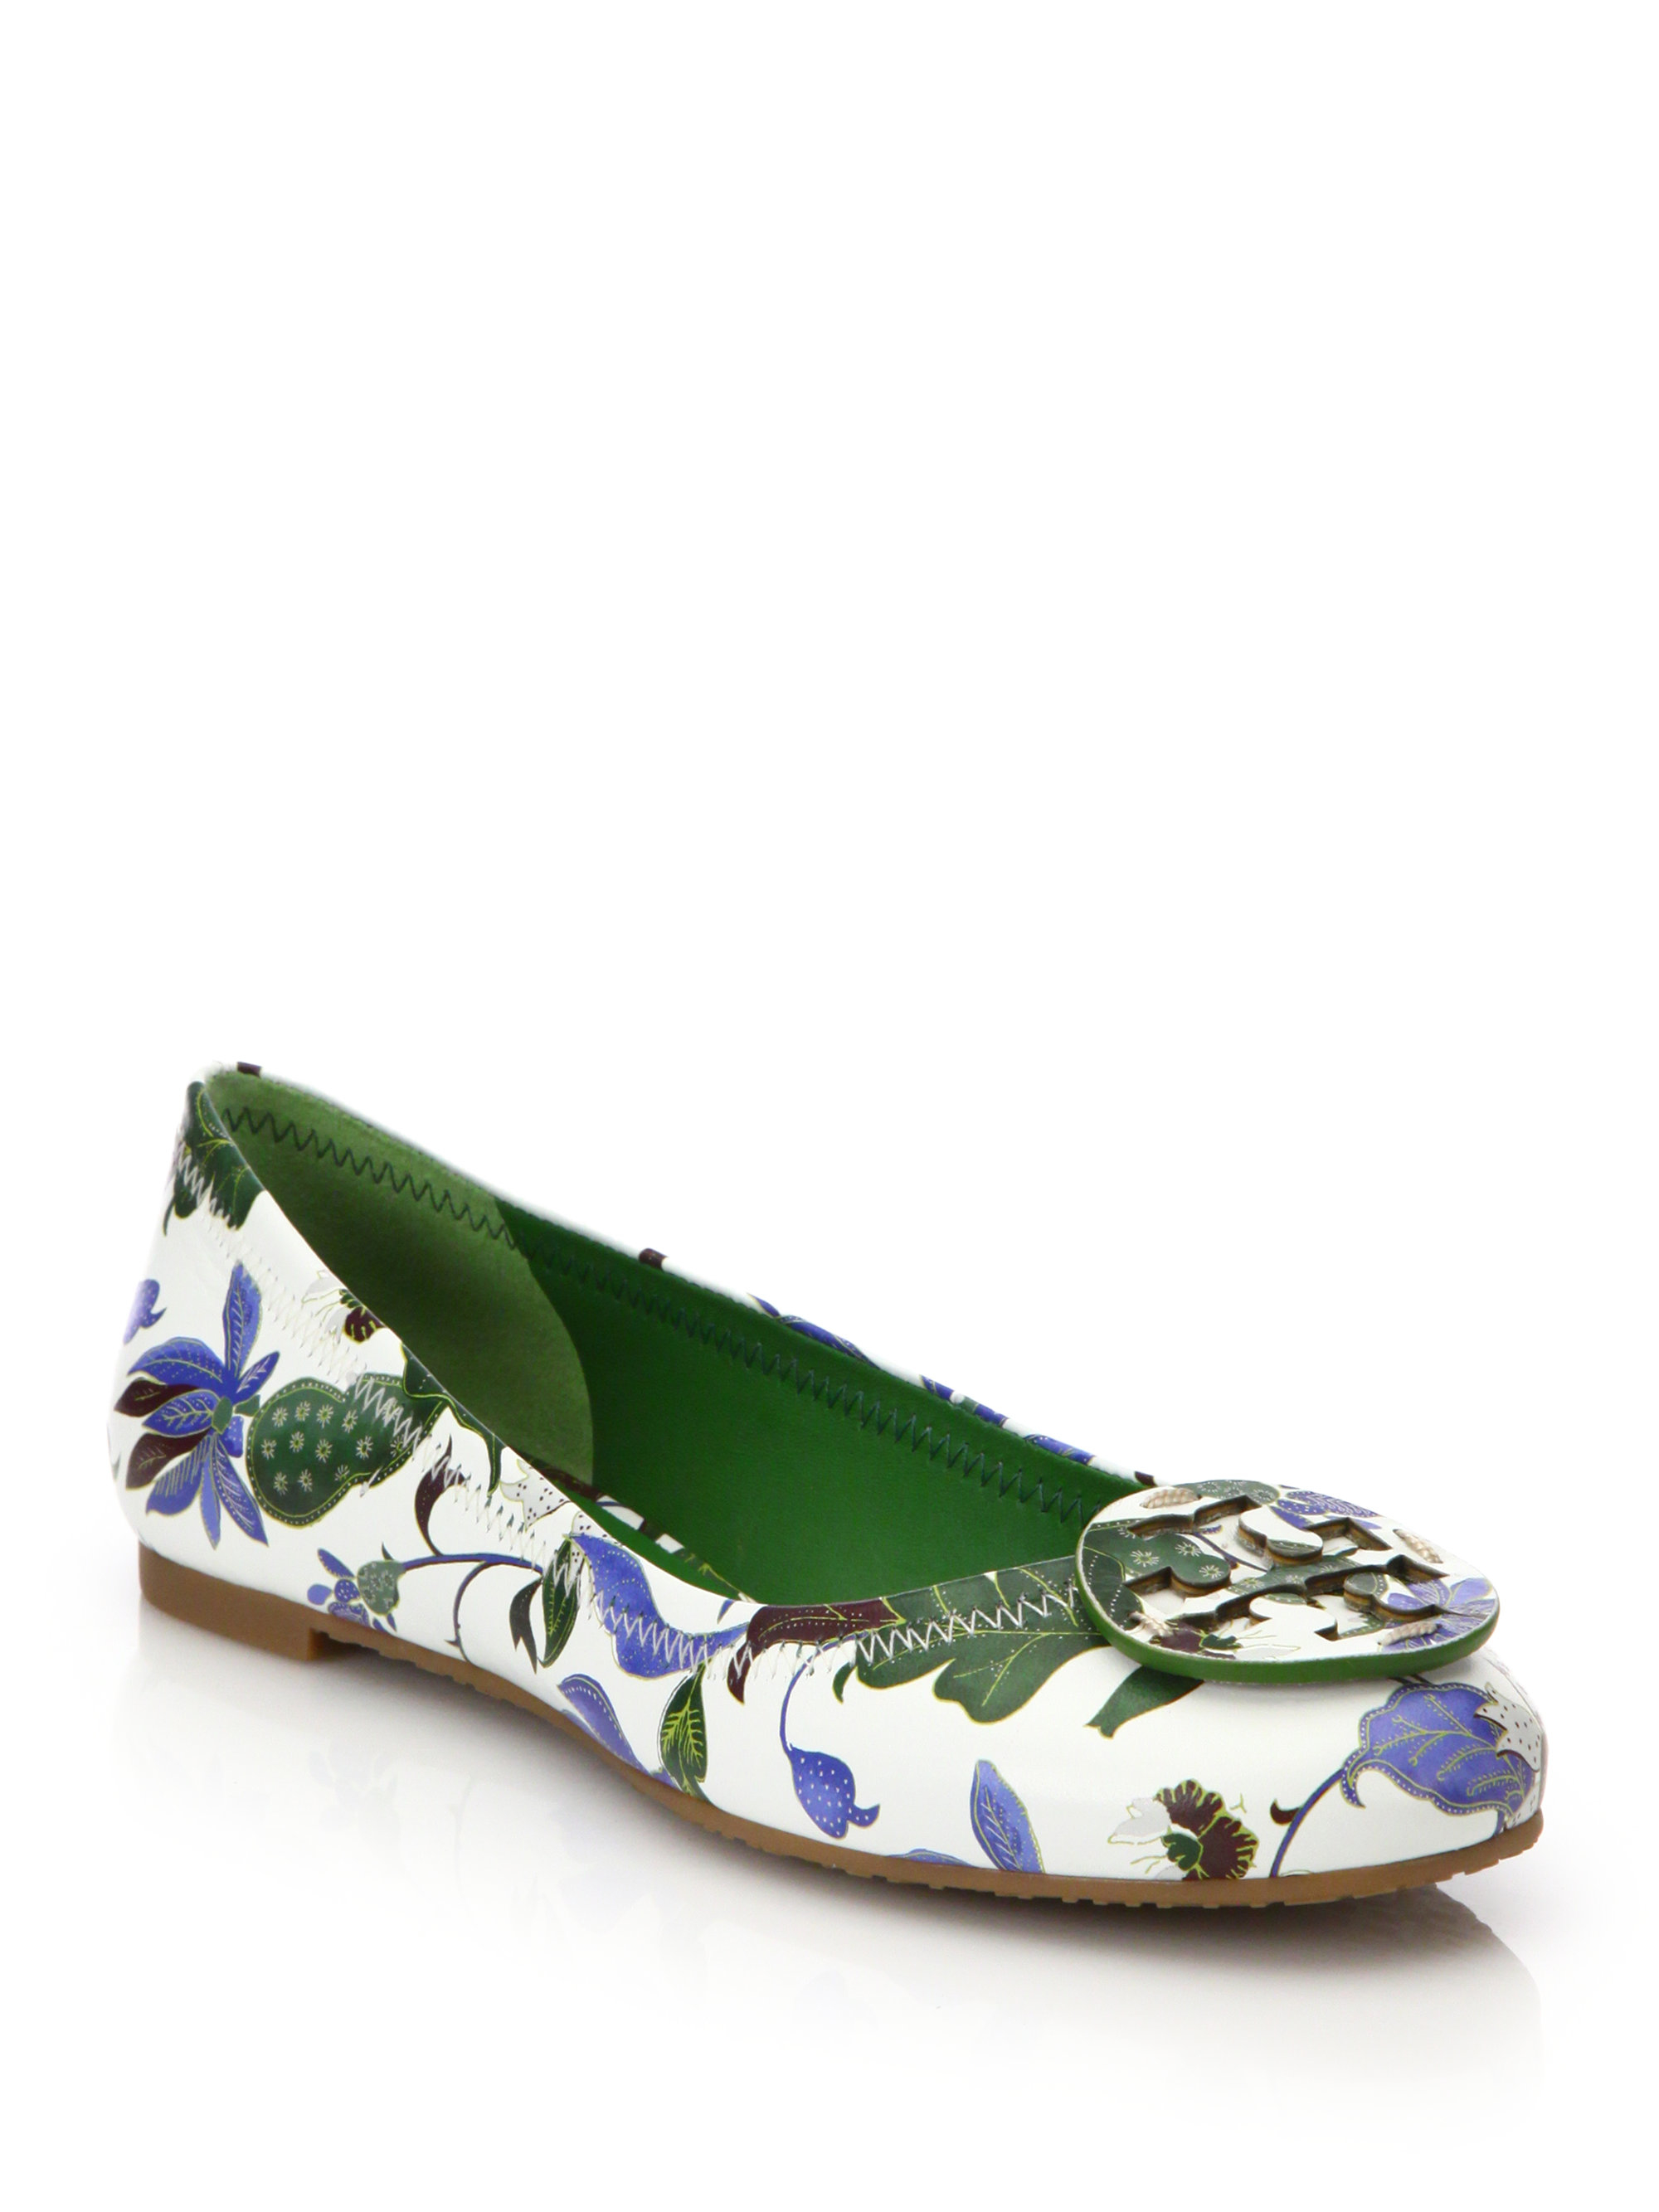 tory burch flower shoes